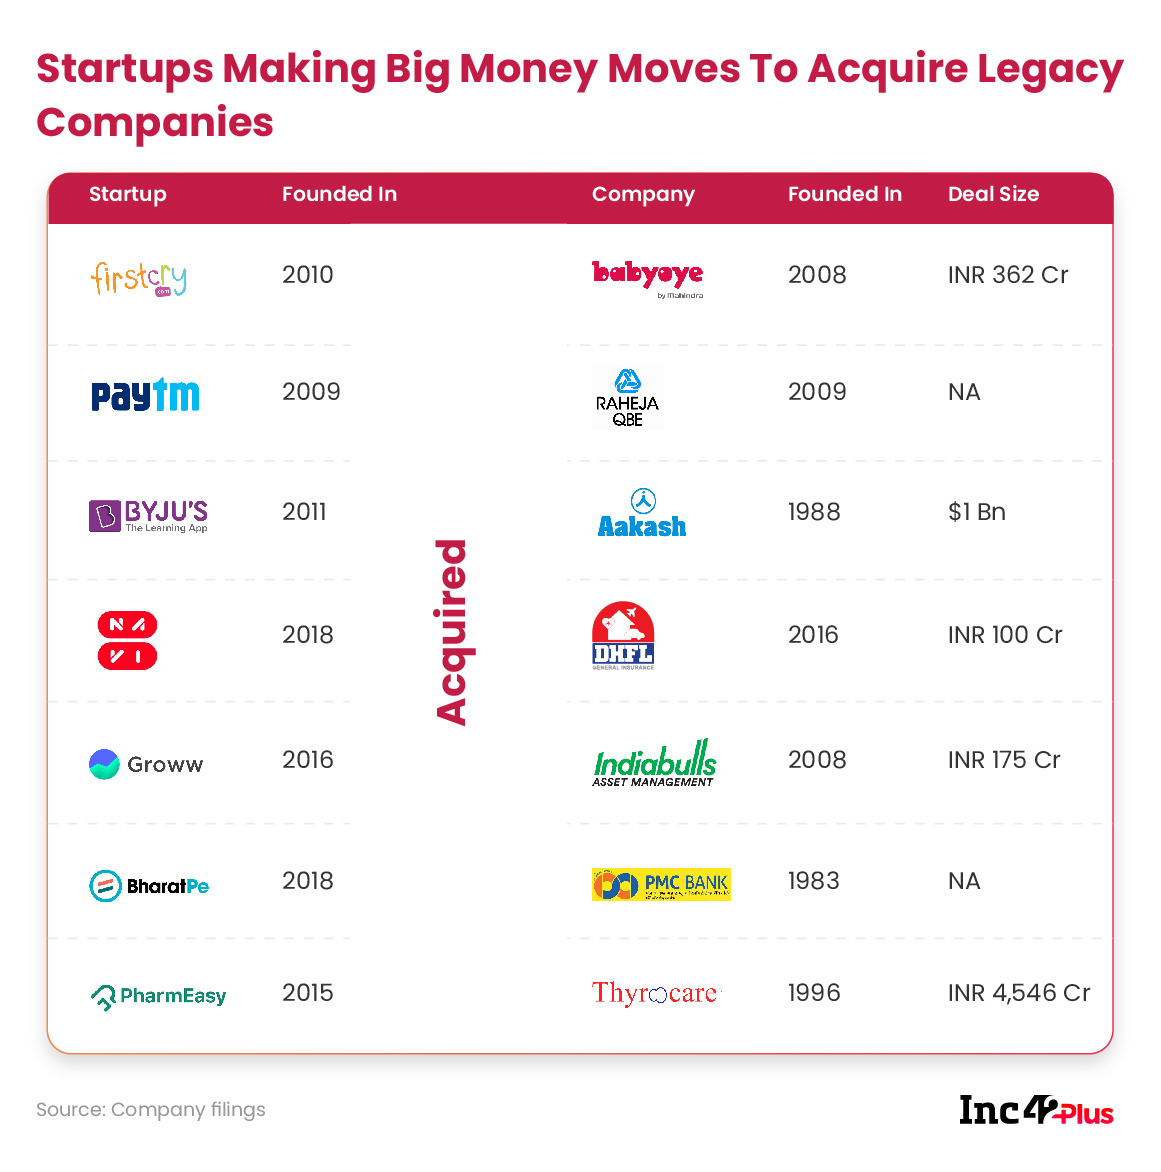 list of prominent company acquisitions by Indian startups